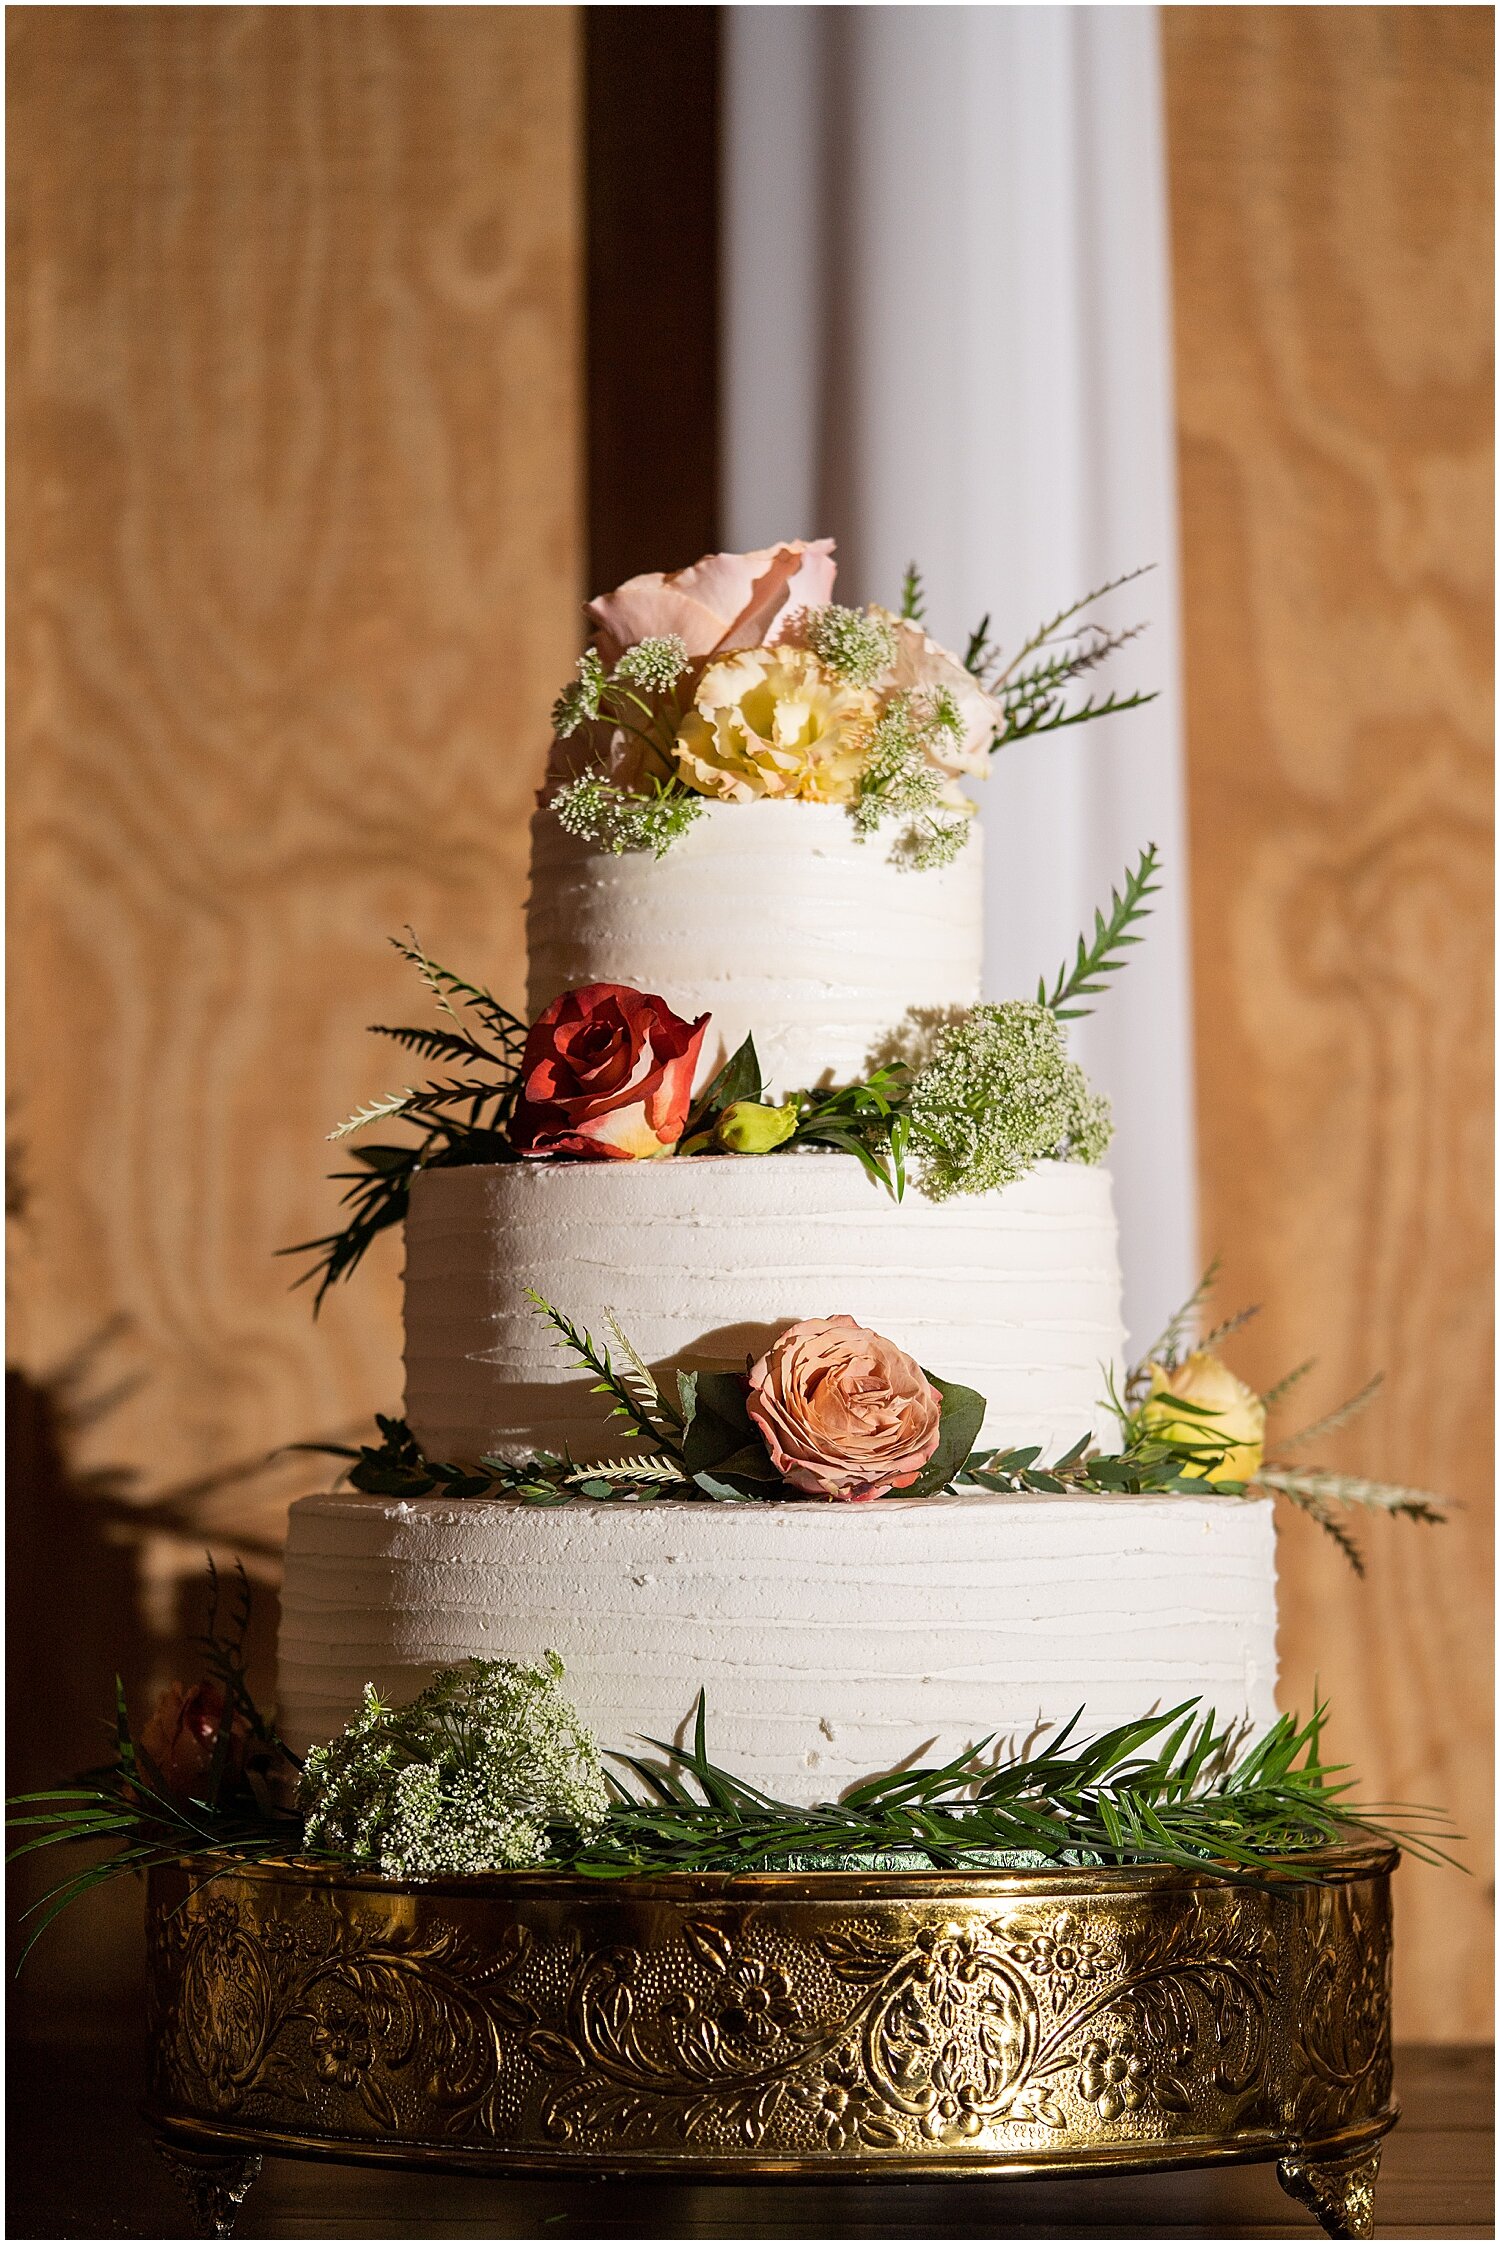  wedding cake with floral decor 